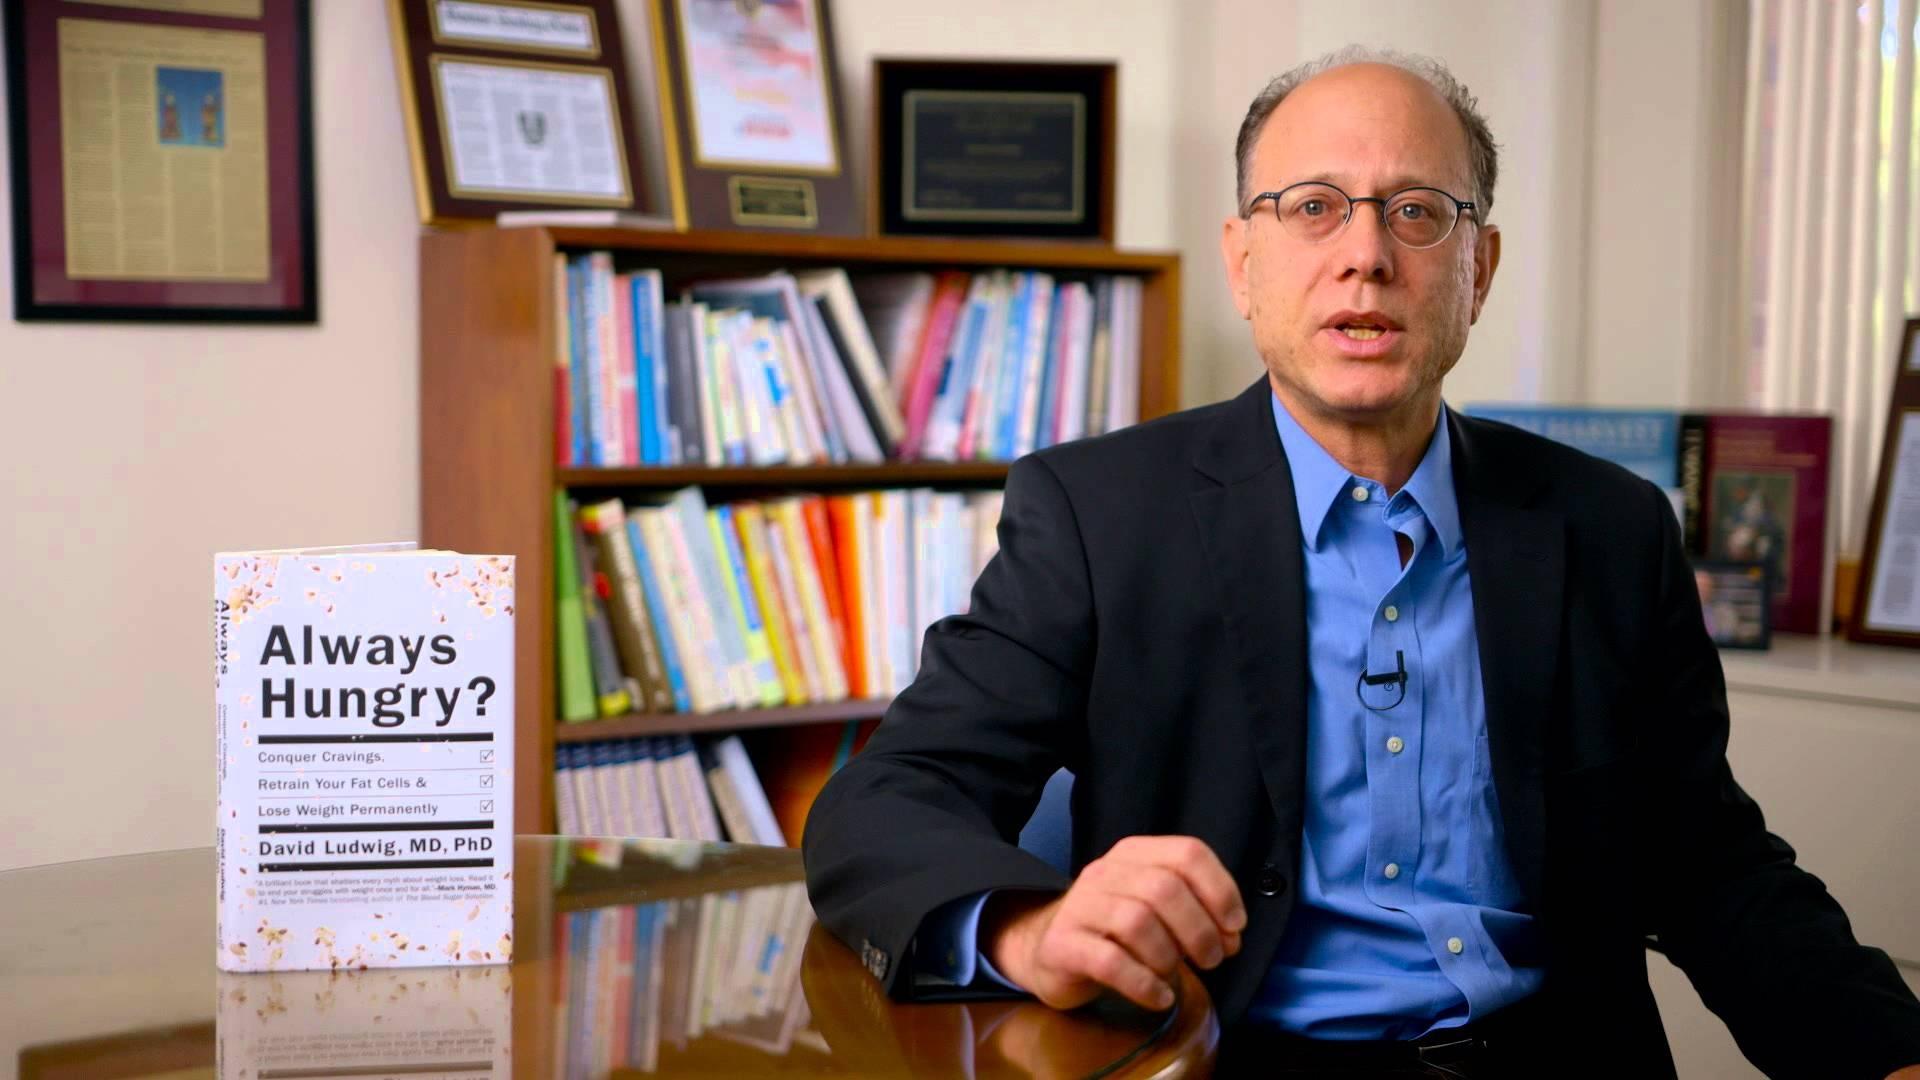 Dr. David Ludwig and his book Always Hungry?